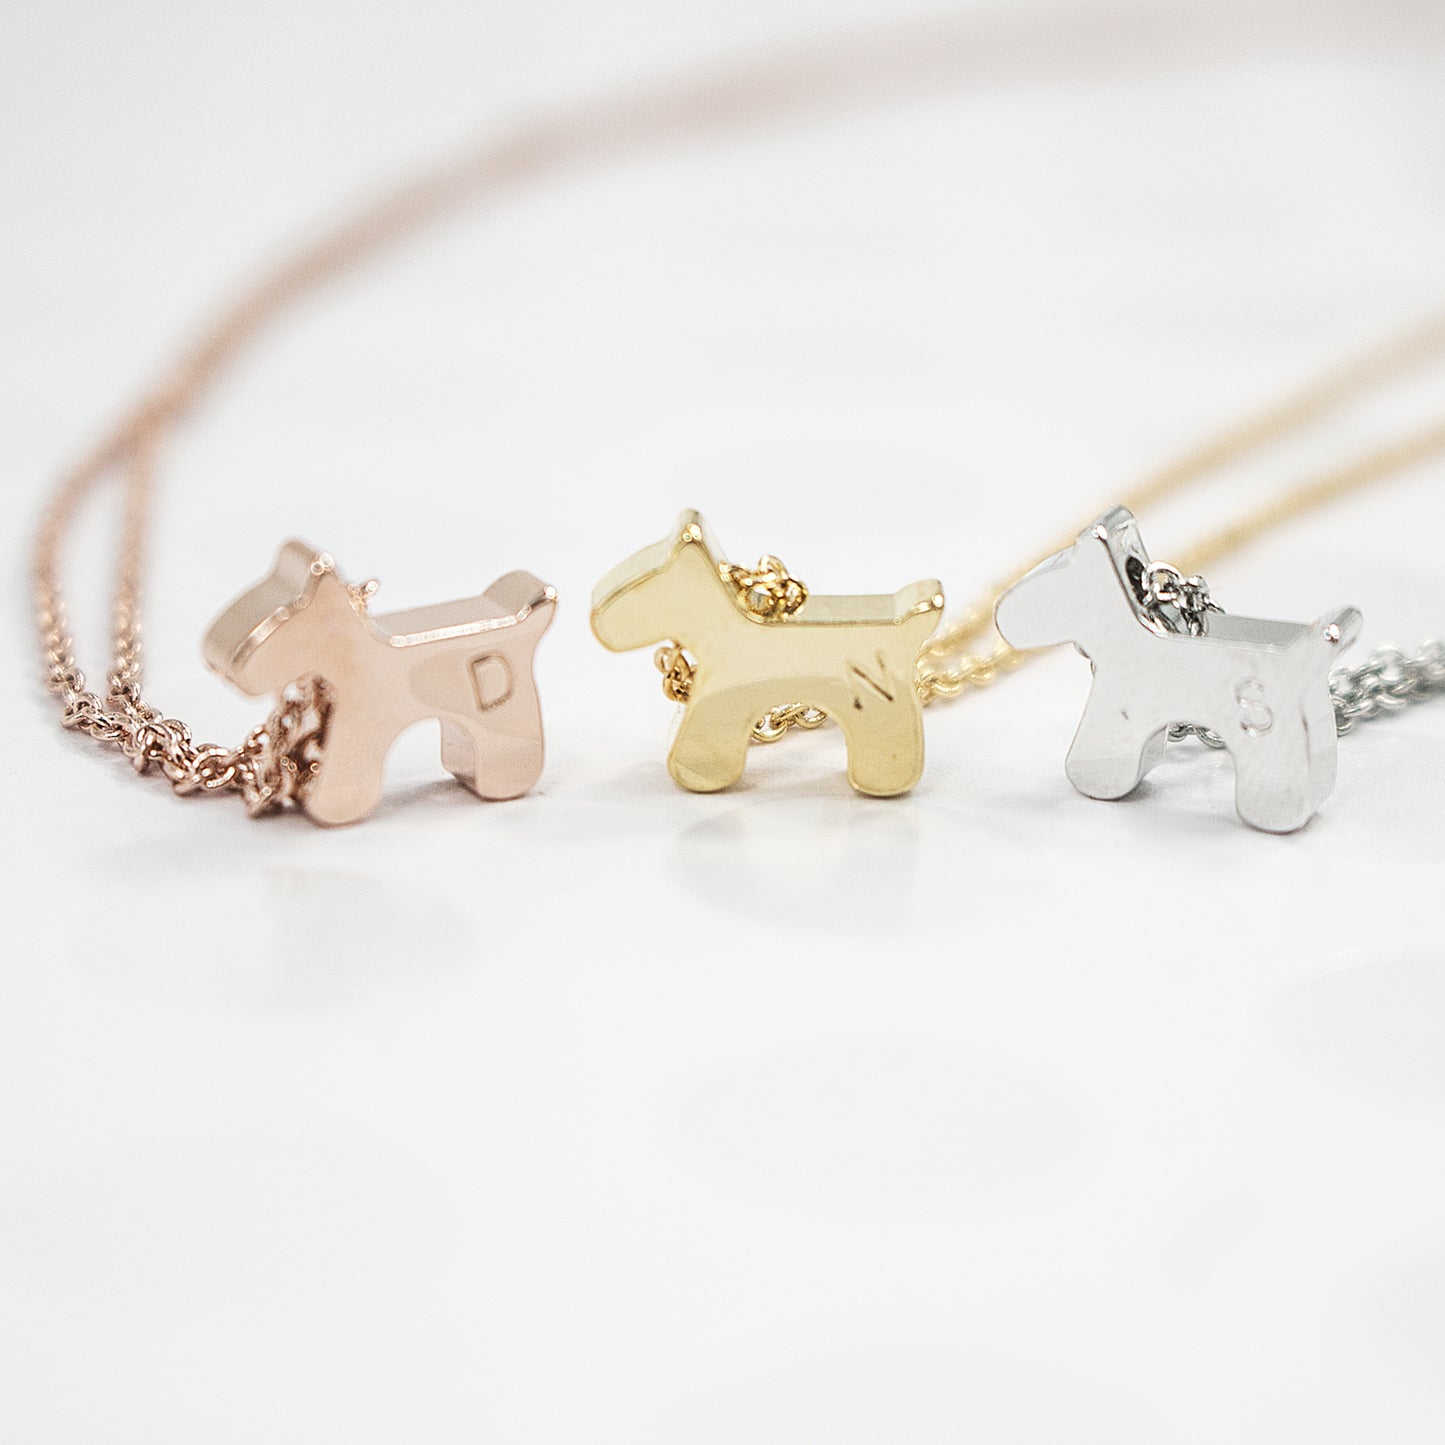 Dainty Initial Puppy Necklace with Hand stamped - 16k Gold Silver Plated